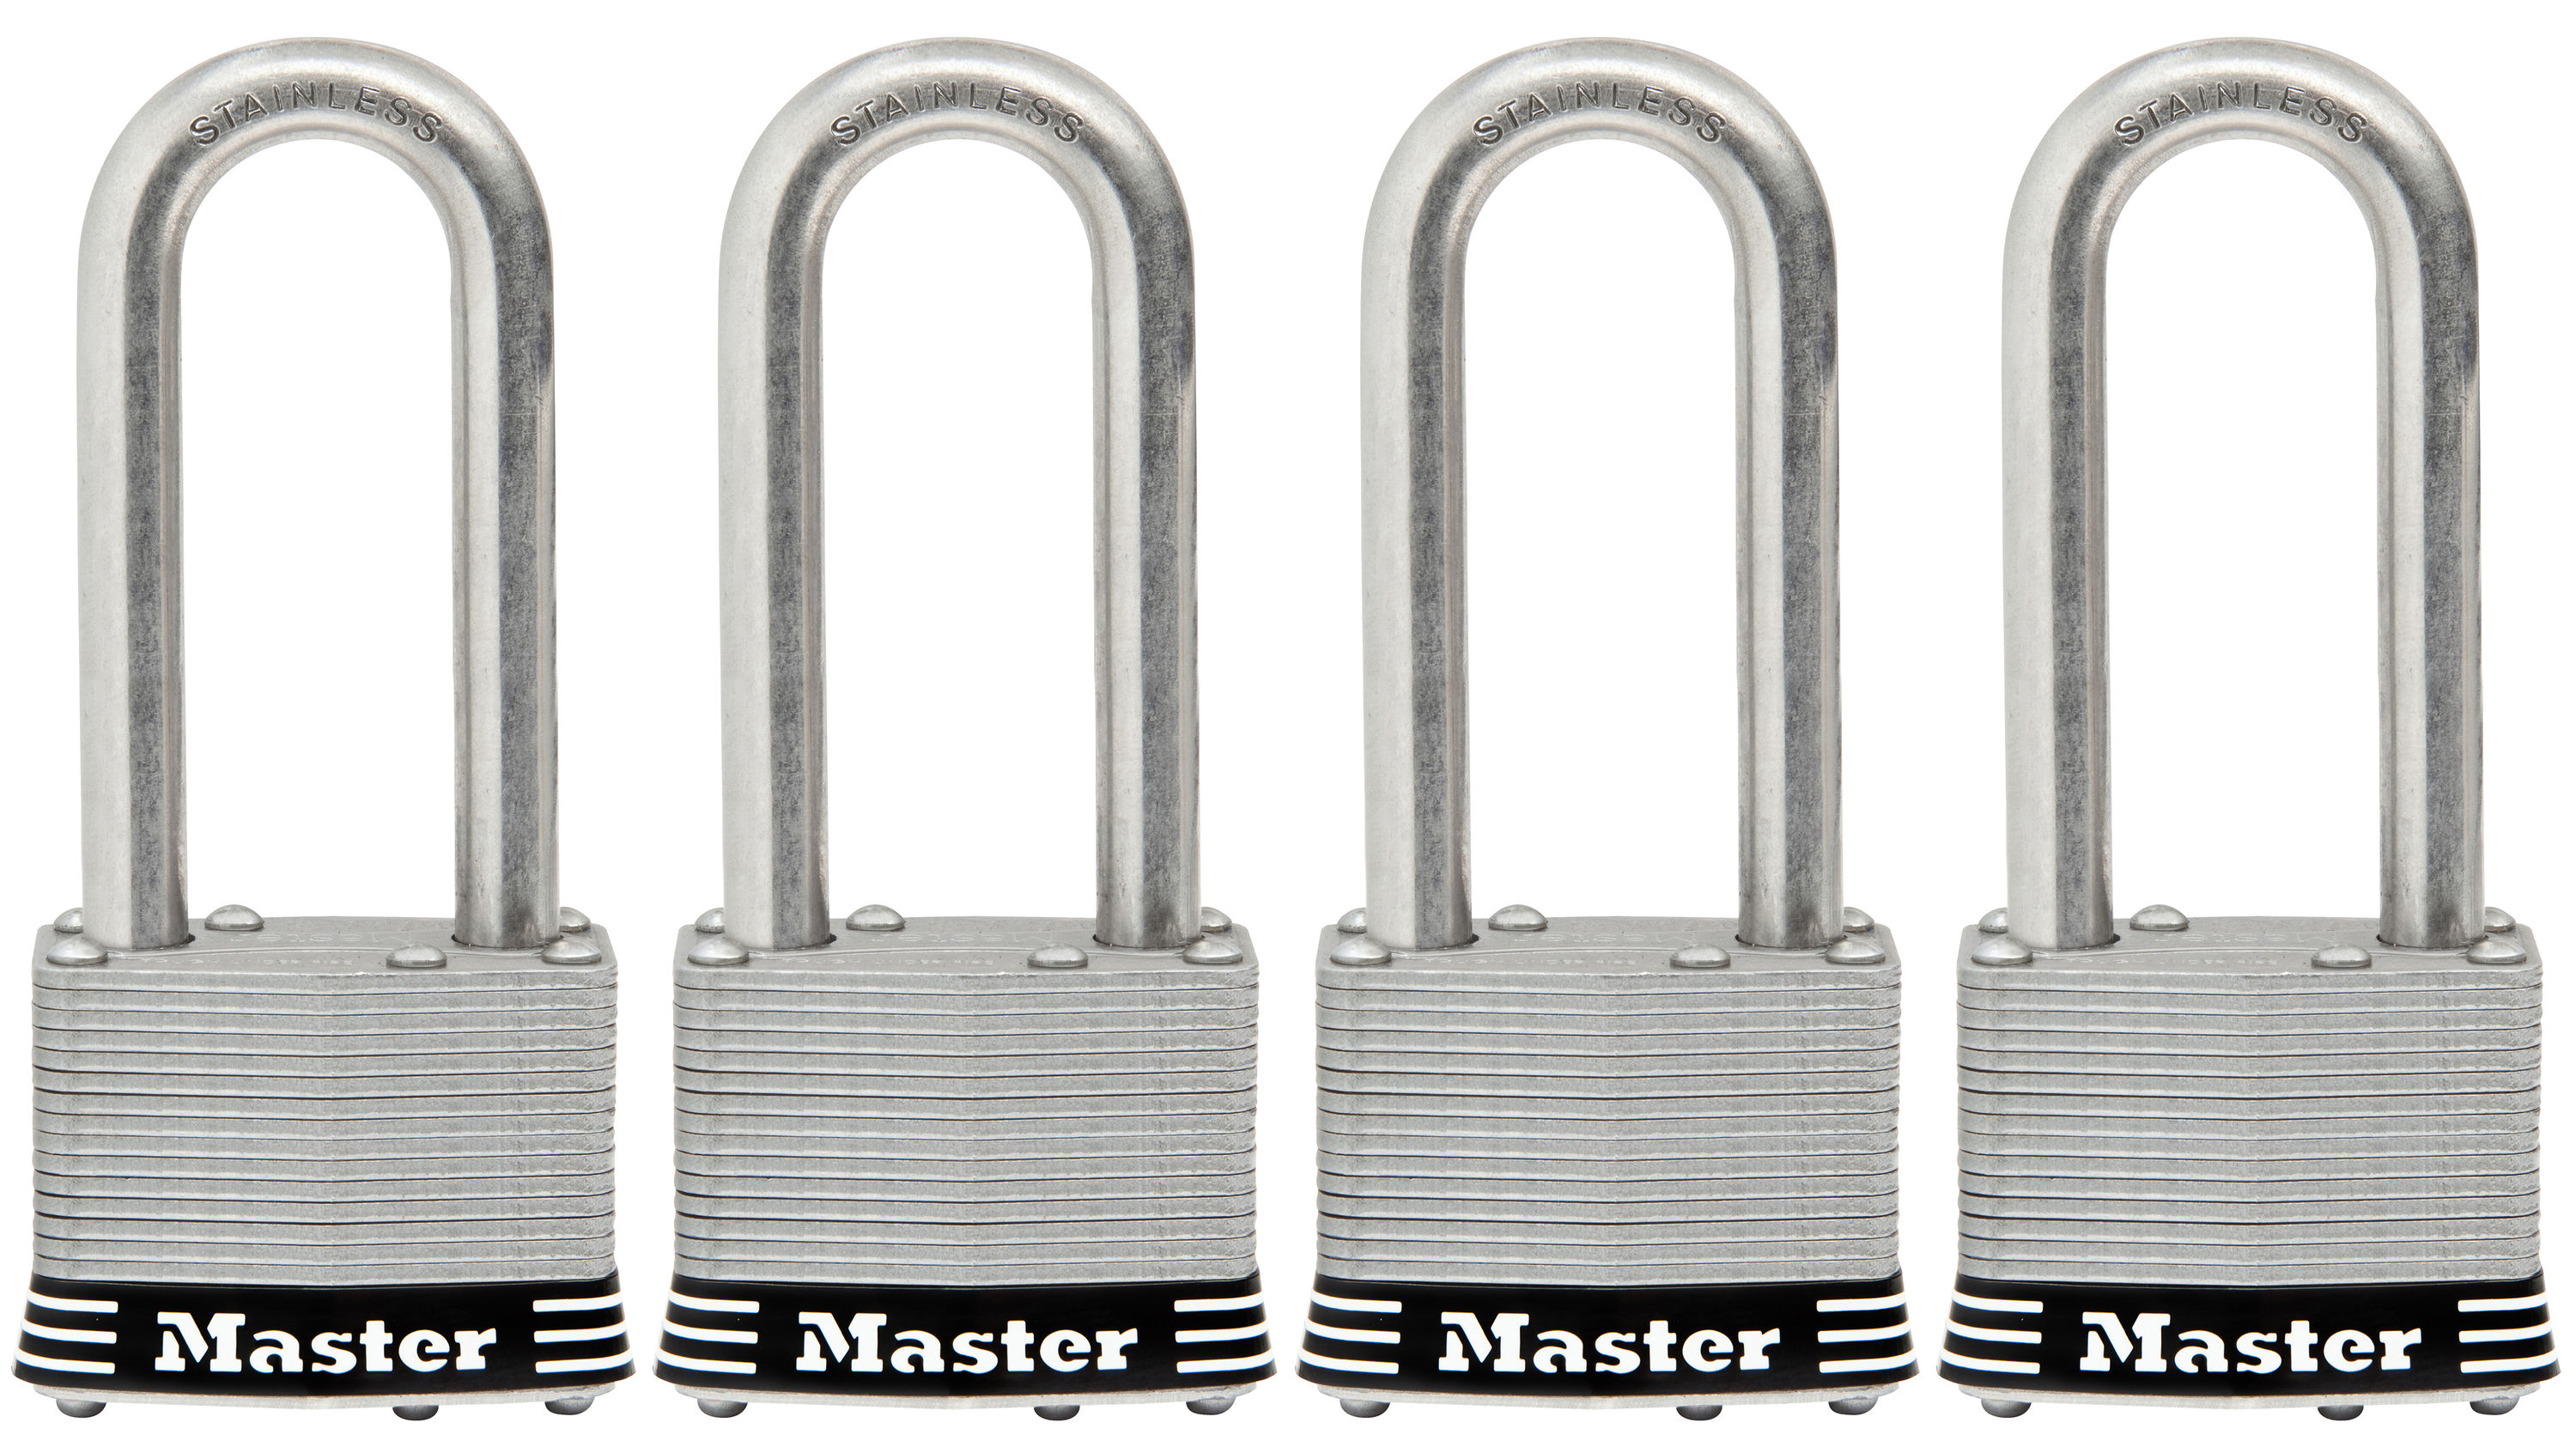 Master Lock Combination Lock, Indoor and Outdoor Padlock, Set Your Own  Combination Lock, Extended 2-1/4 in. Lock Shackle with Brass Finish